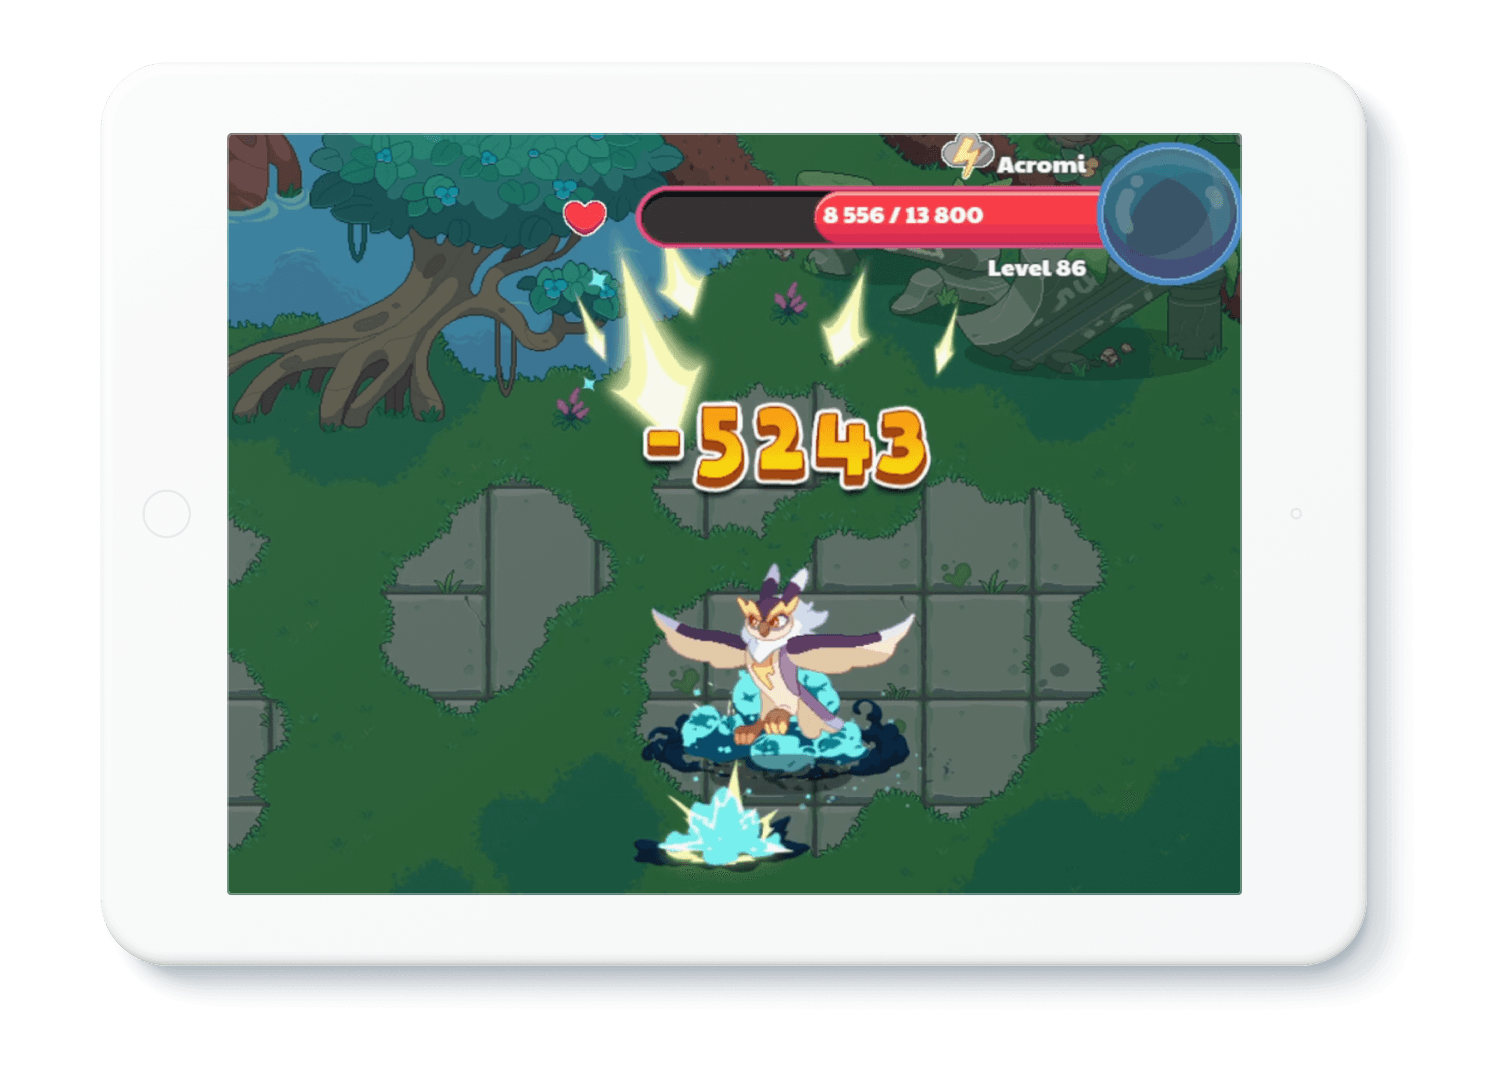 Illustration of tablet device with an in-game Prodigy wizard battle featured on the screen.